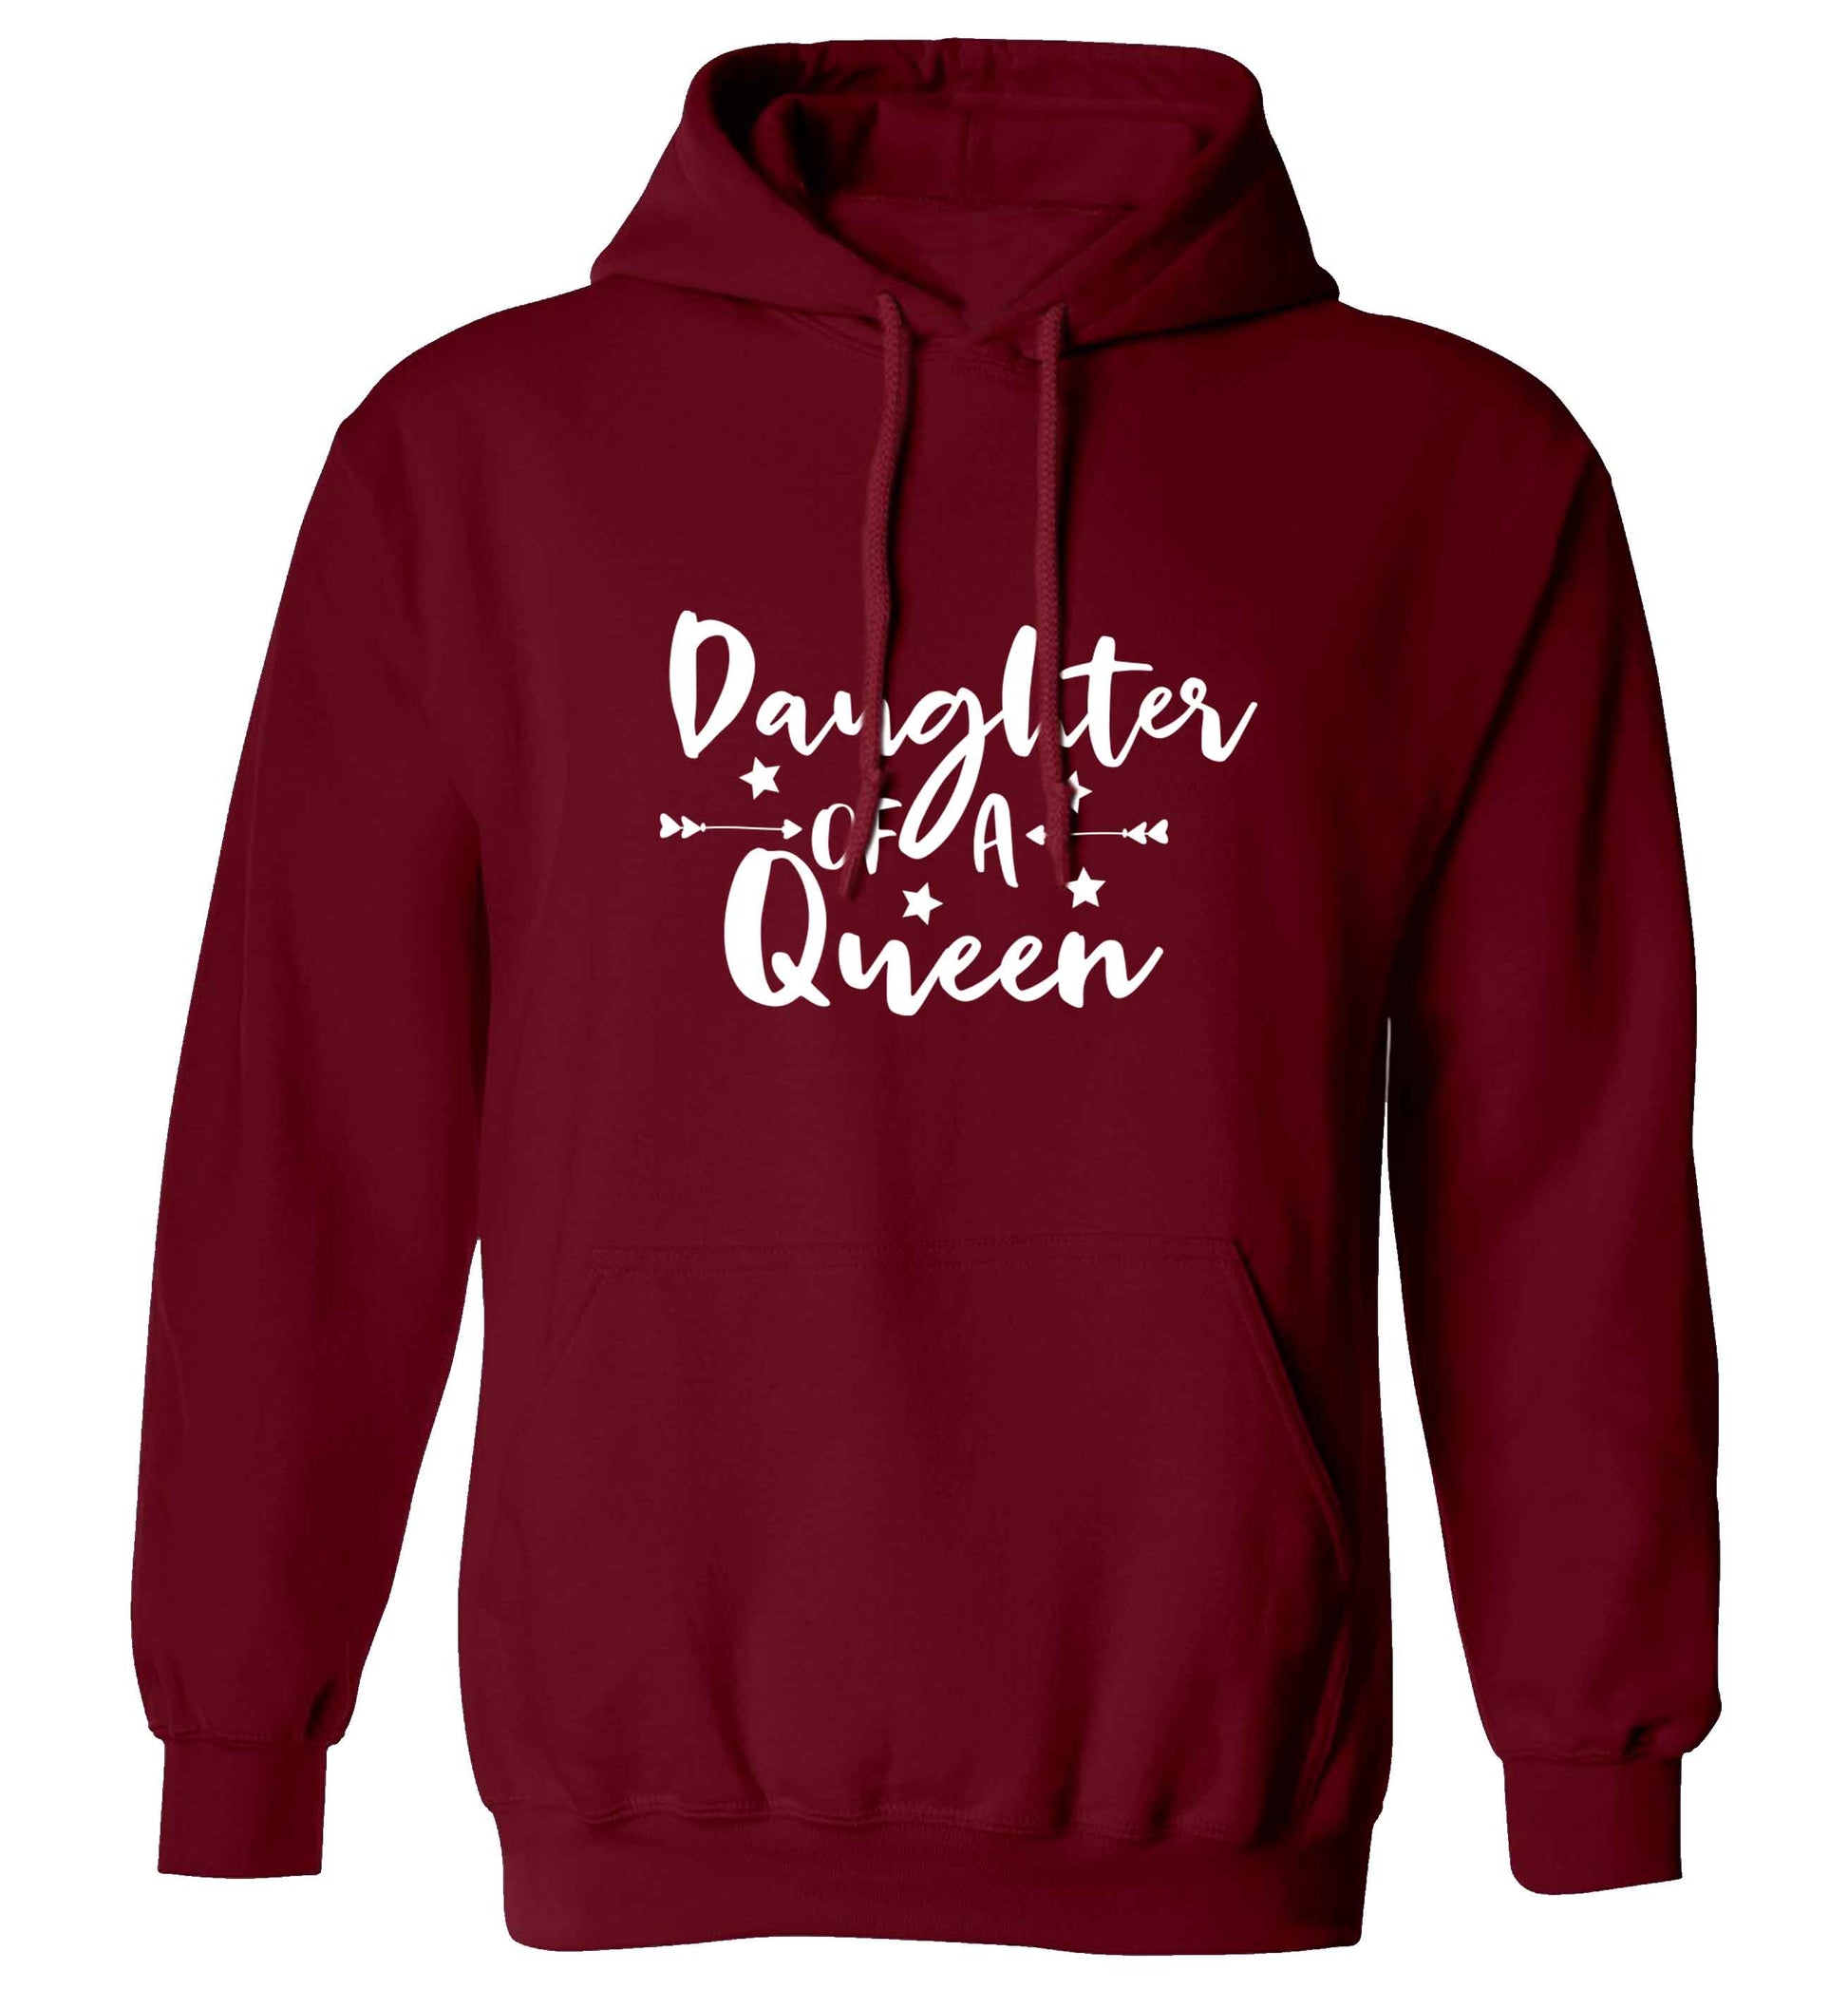 Daughter of a Queen adults unisex maroon hoodie 2XL